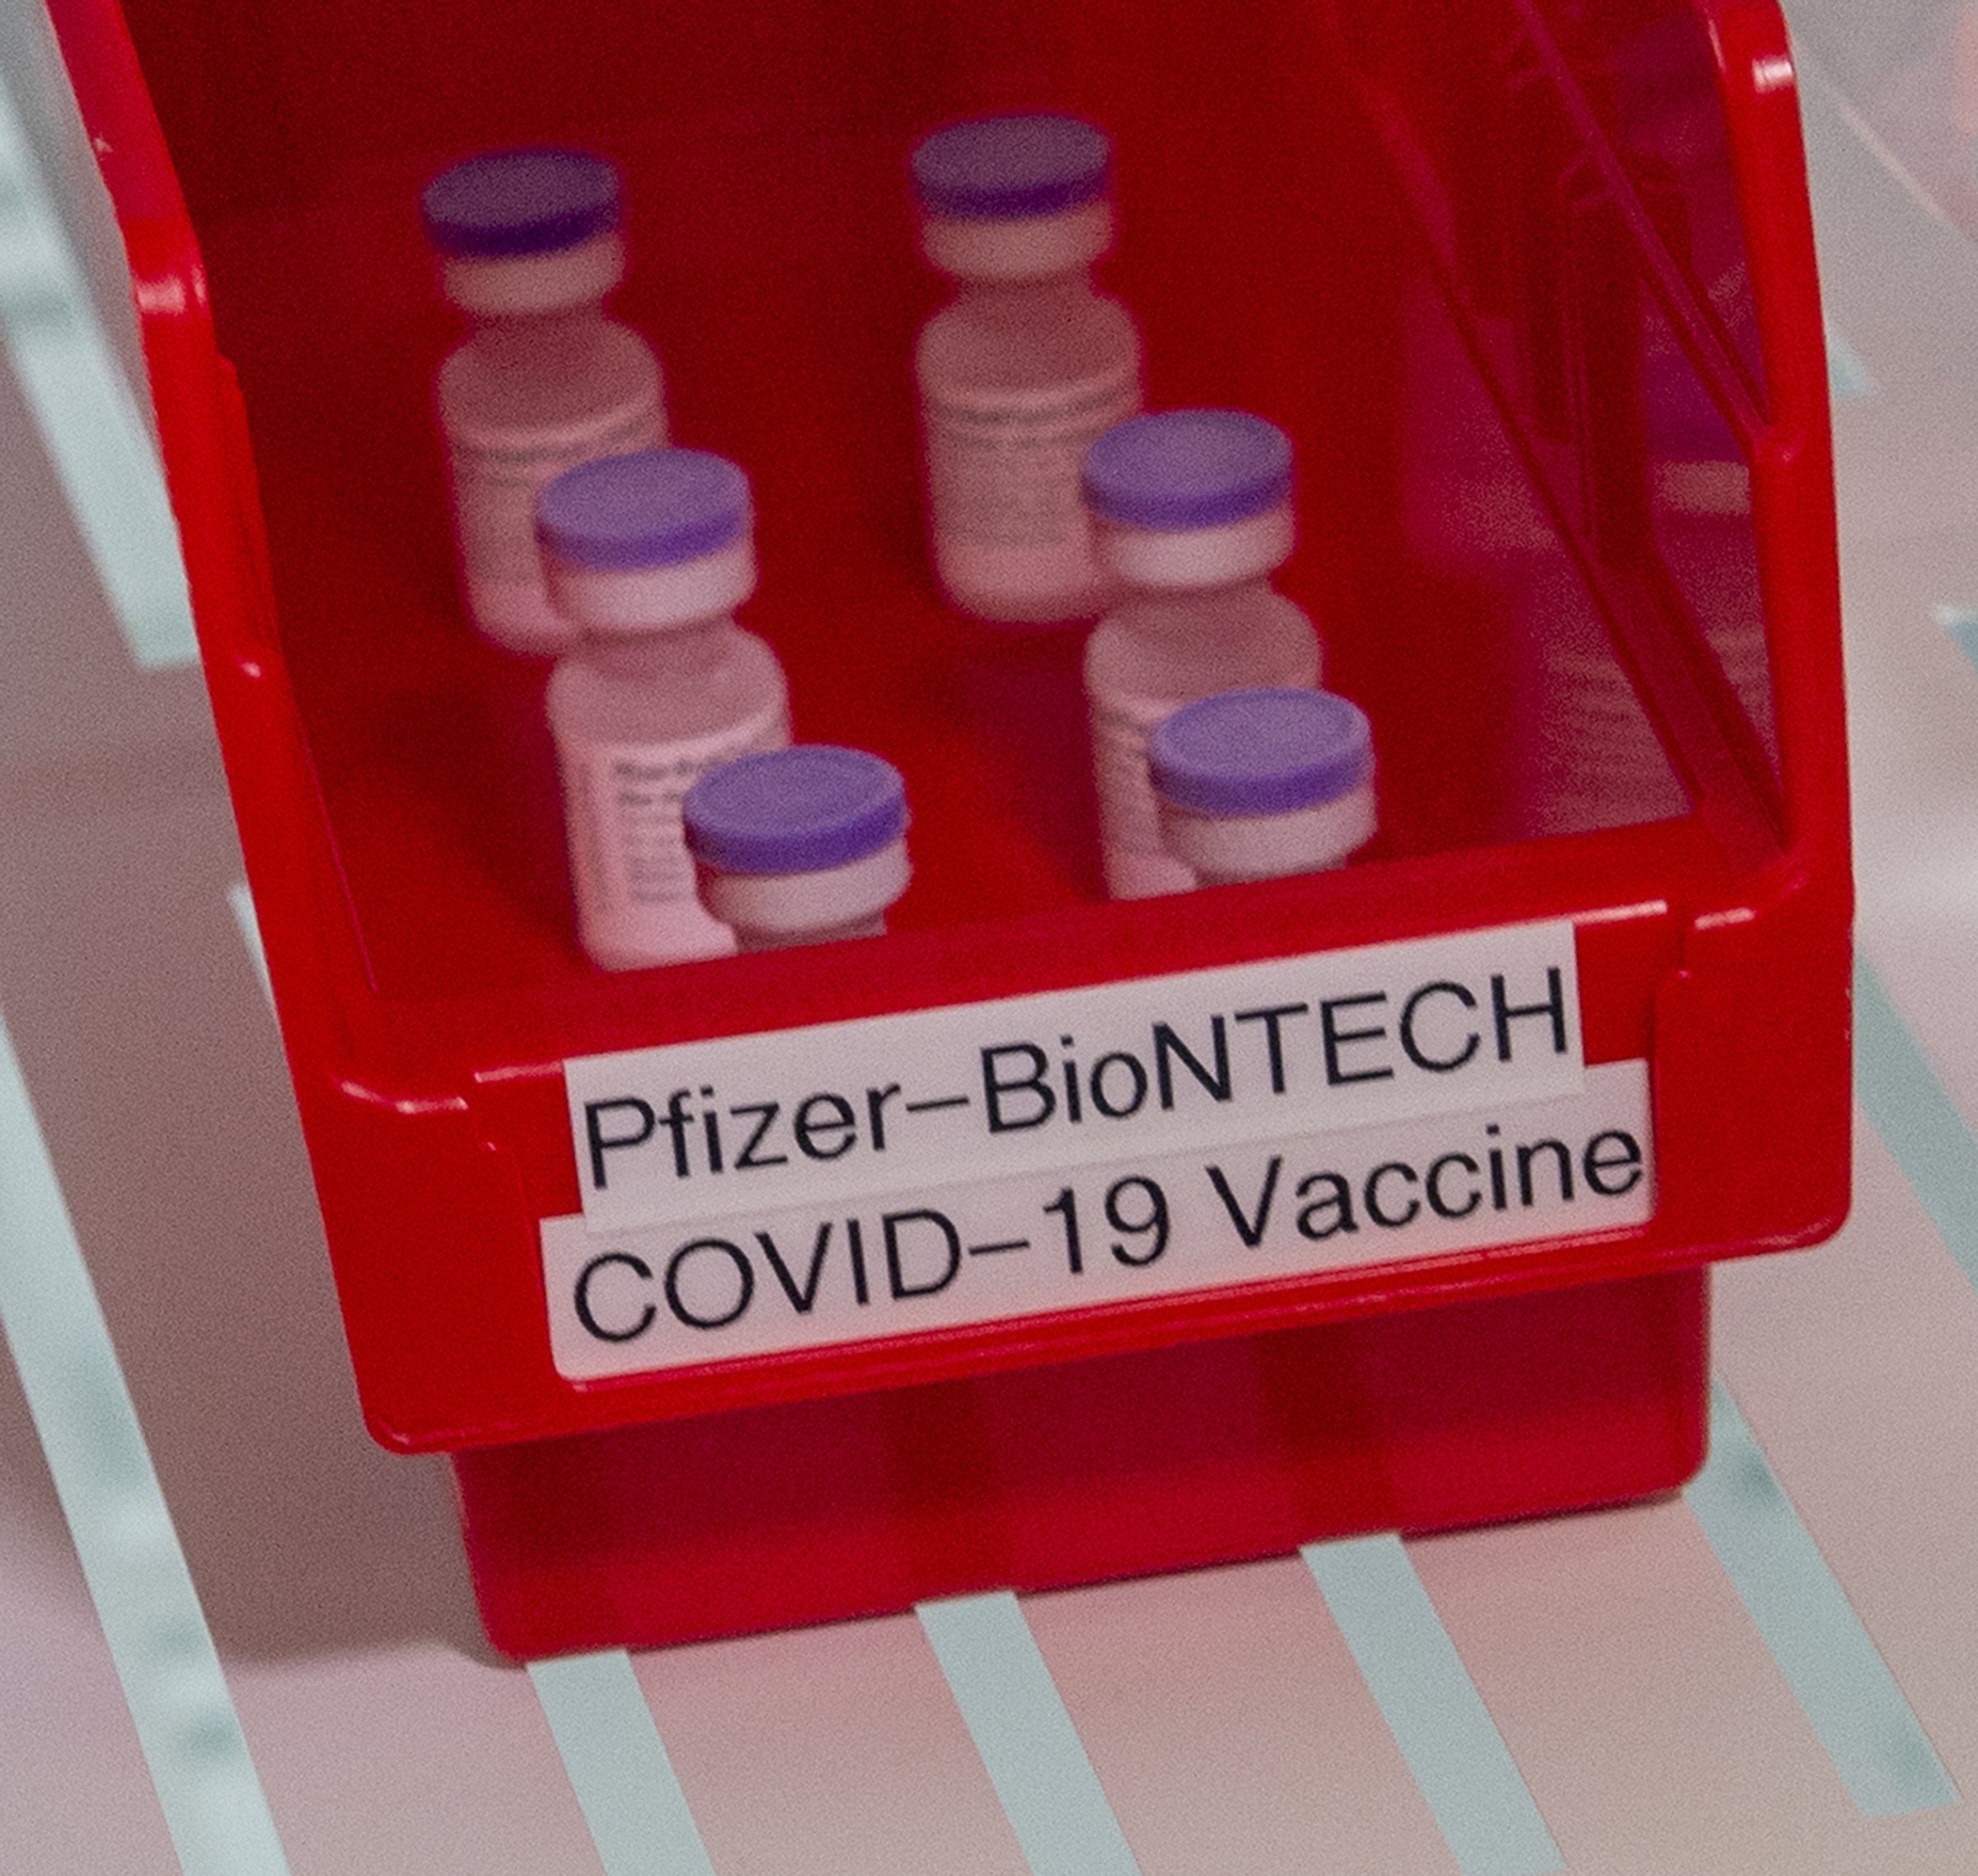 The first vials of Pfizer-BioNTech COVID-19 vaccine sit in a refrigerator at Ochsner Hospital on O'Neal Lane, in Baton Rouge, La., U.S., Dec. 15, 2020. (The Advocate via AP, Pool)